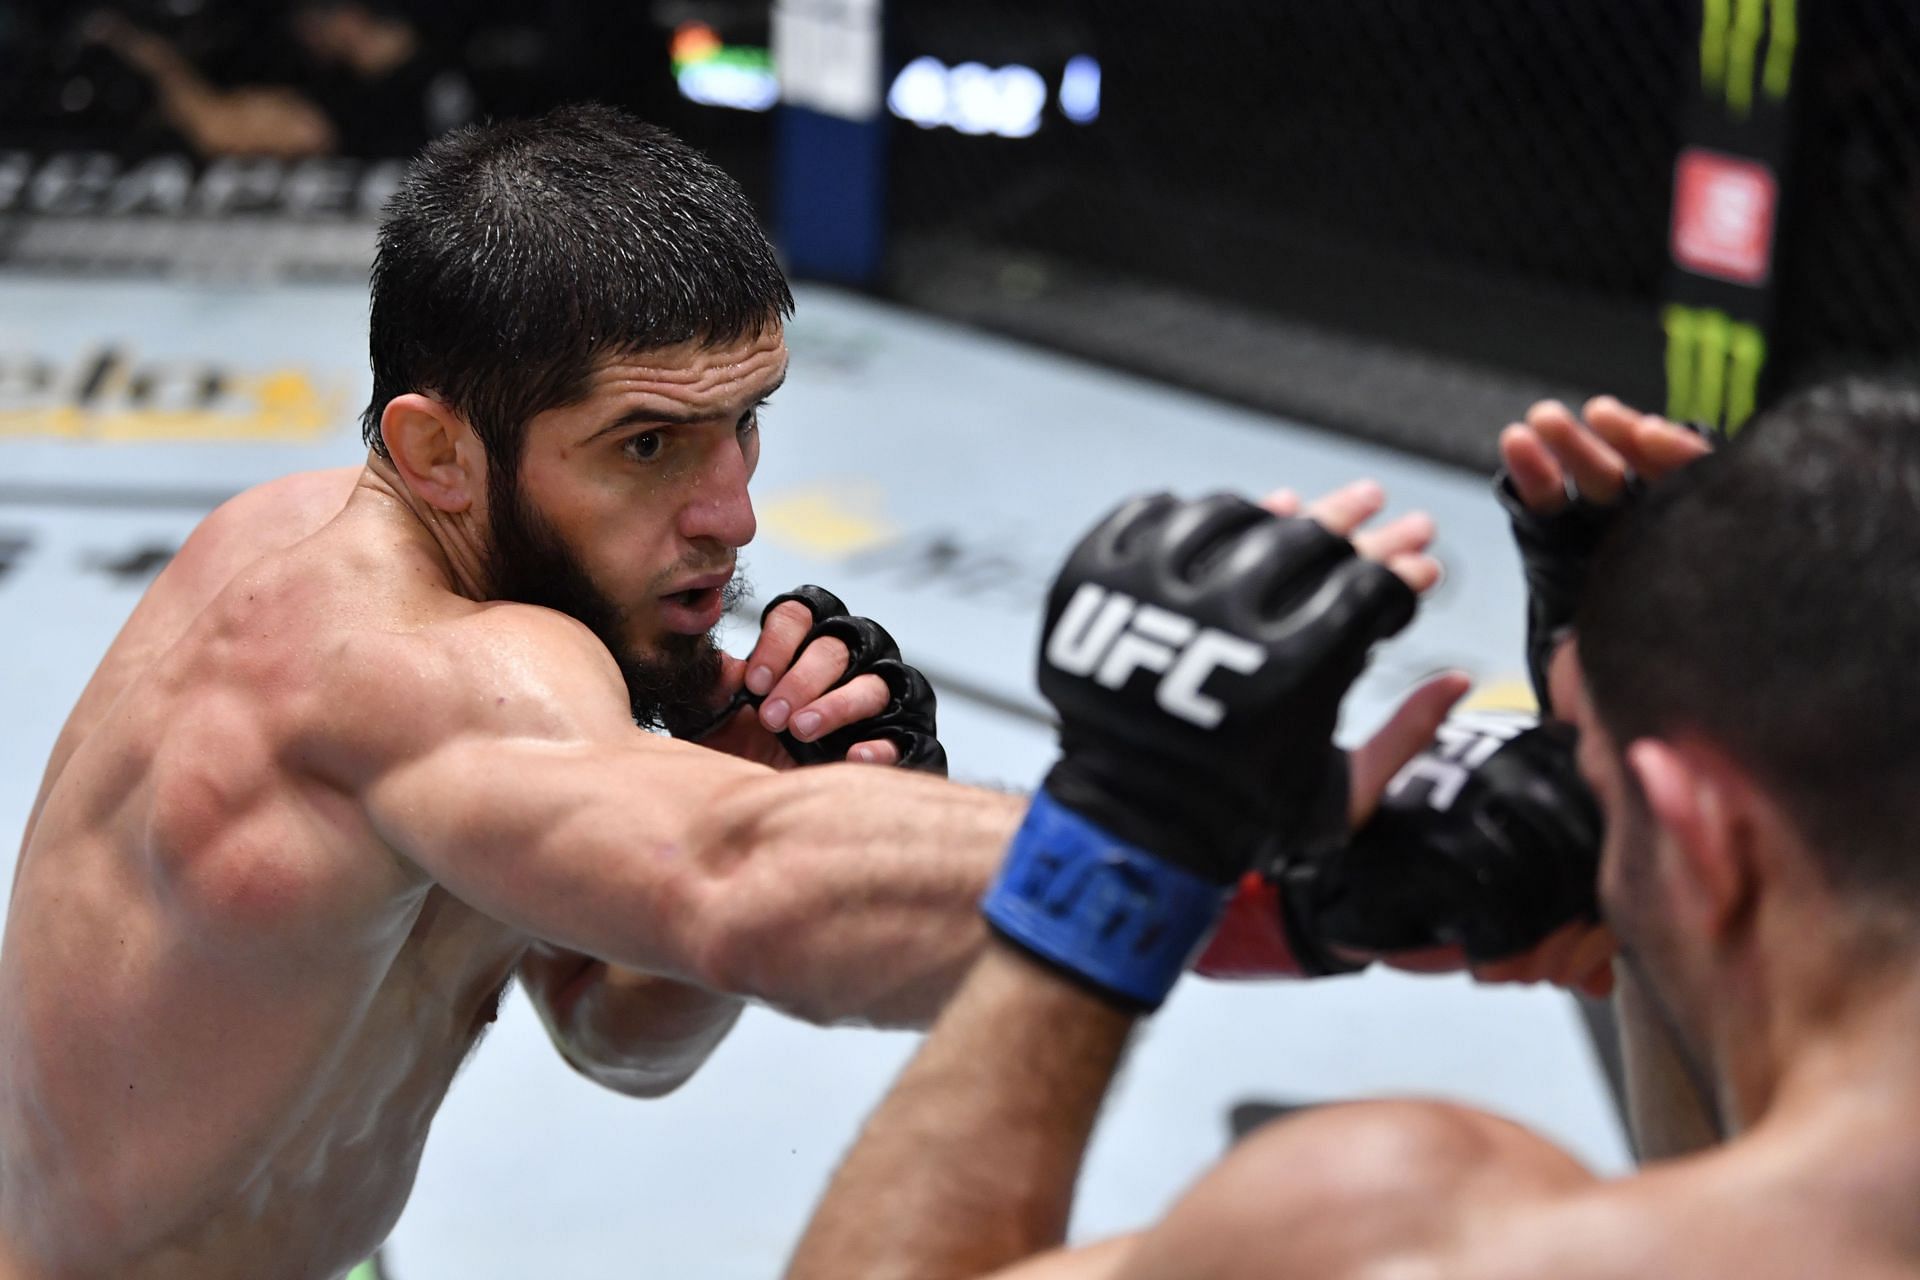 A win at UFC 269 would likely make Makhachev the number one contender at lightweight